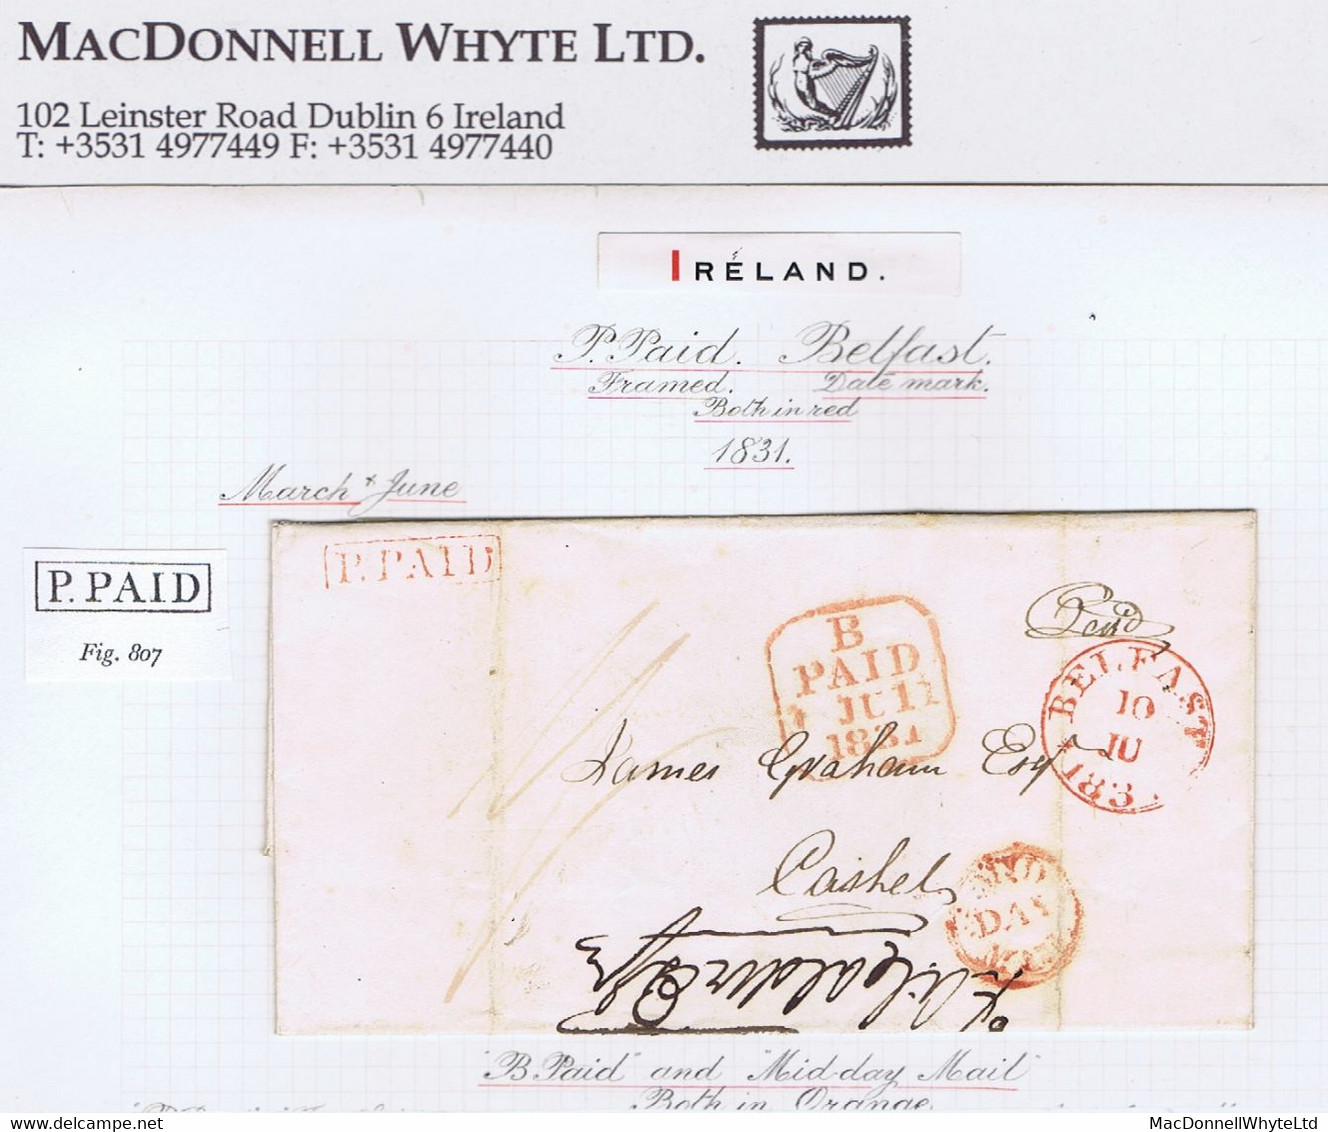 Ireland Belfast 1831 Cover To Cashel With Boxed Hs P.PAID Of Belfast In Black, BELFAST 1831 Cds For 10 JU, MID/DAY/MAIL - Prephilately